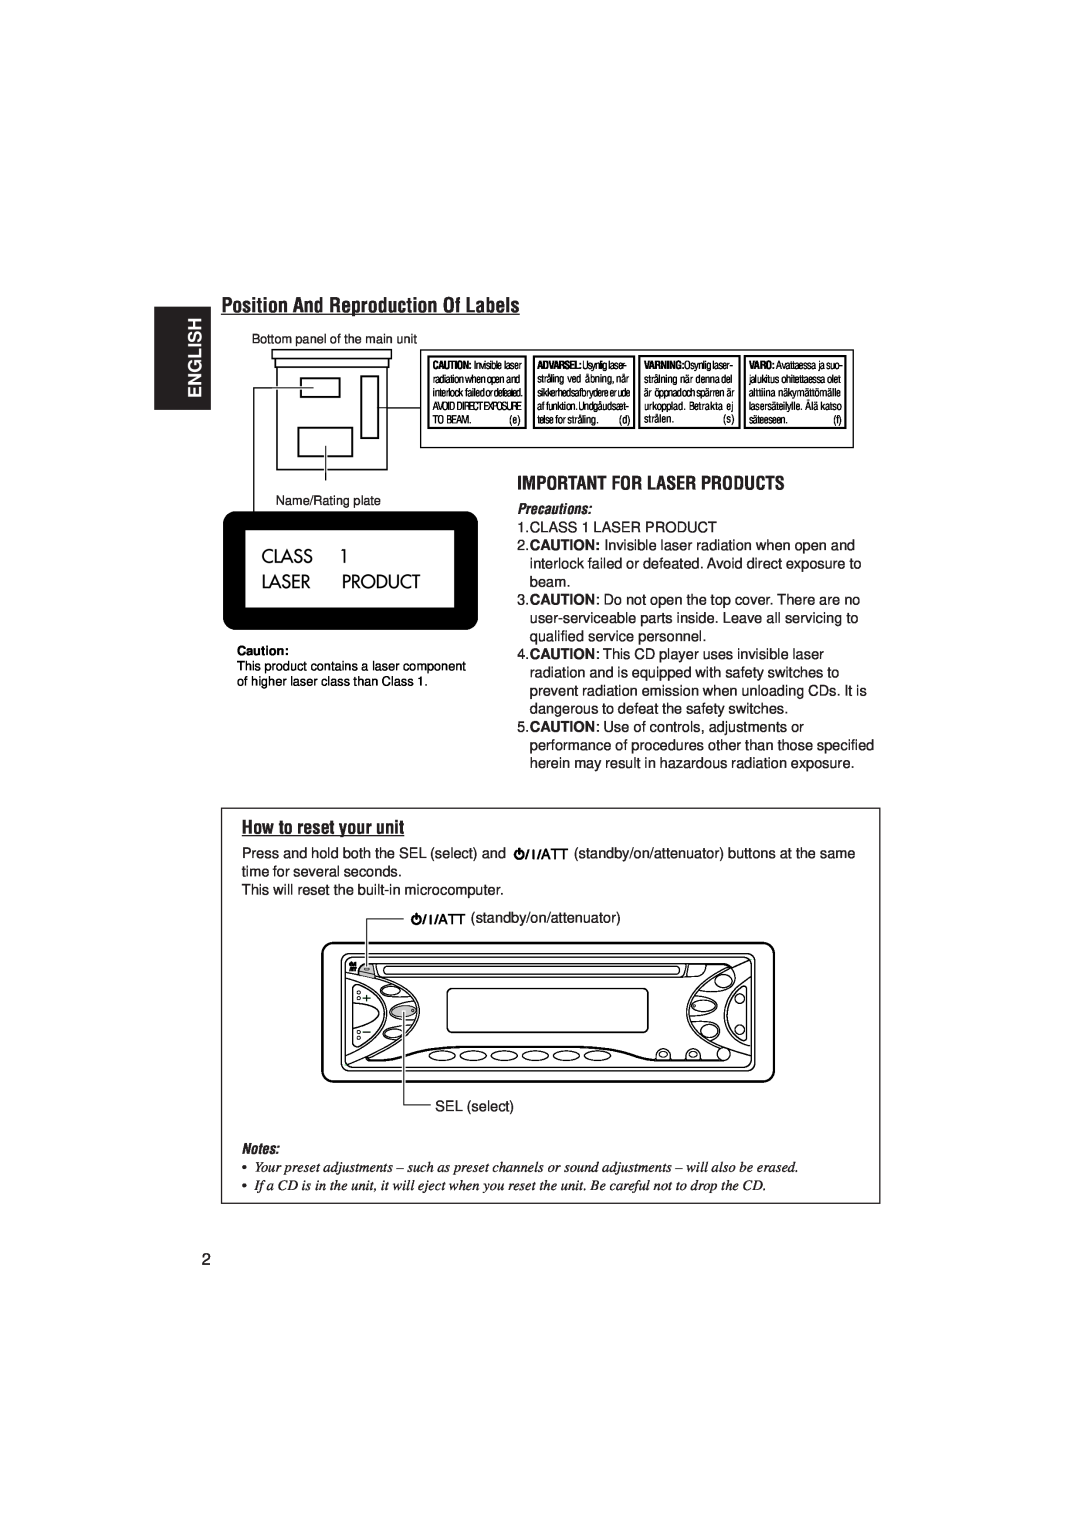 JVC KD-S723R, KD-S871R Position And Reproduction Of Labels, English, Important For Laser Products, How to reset your unit 